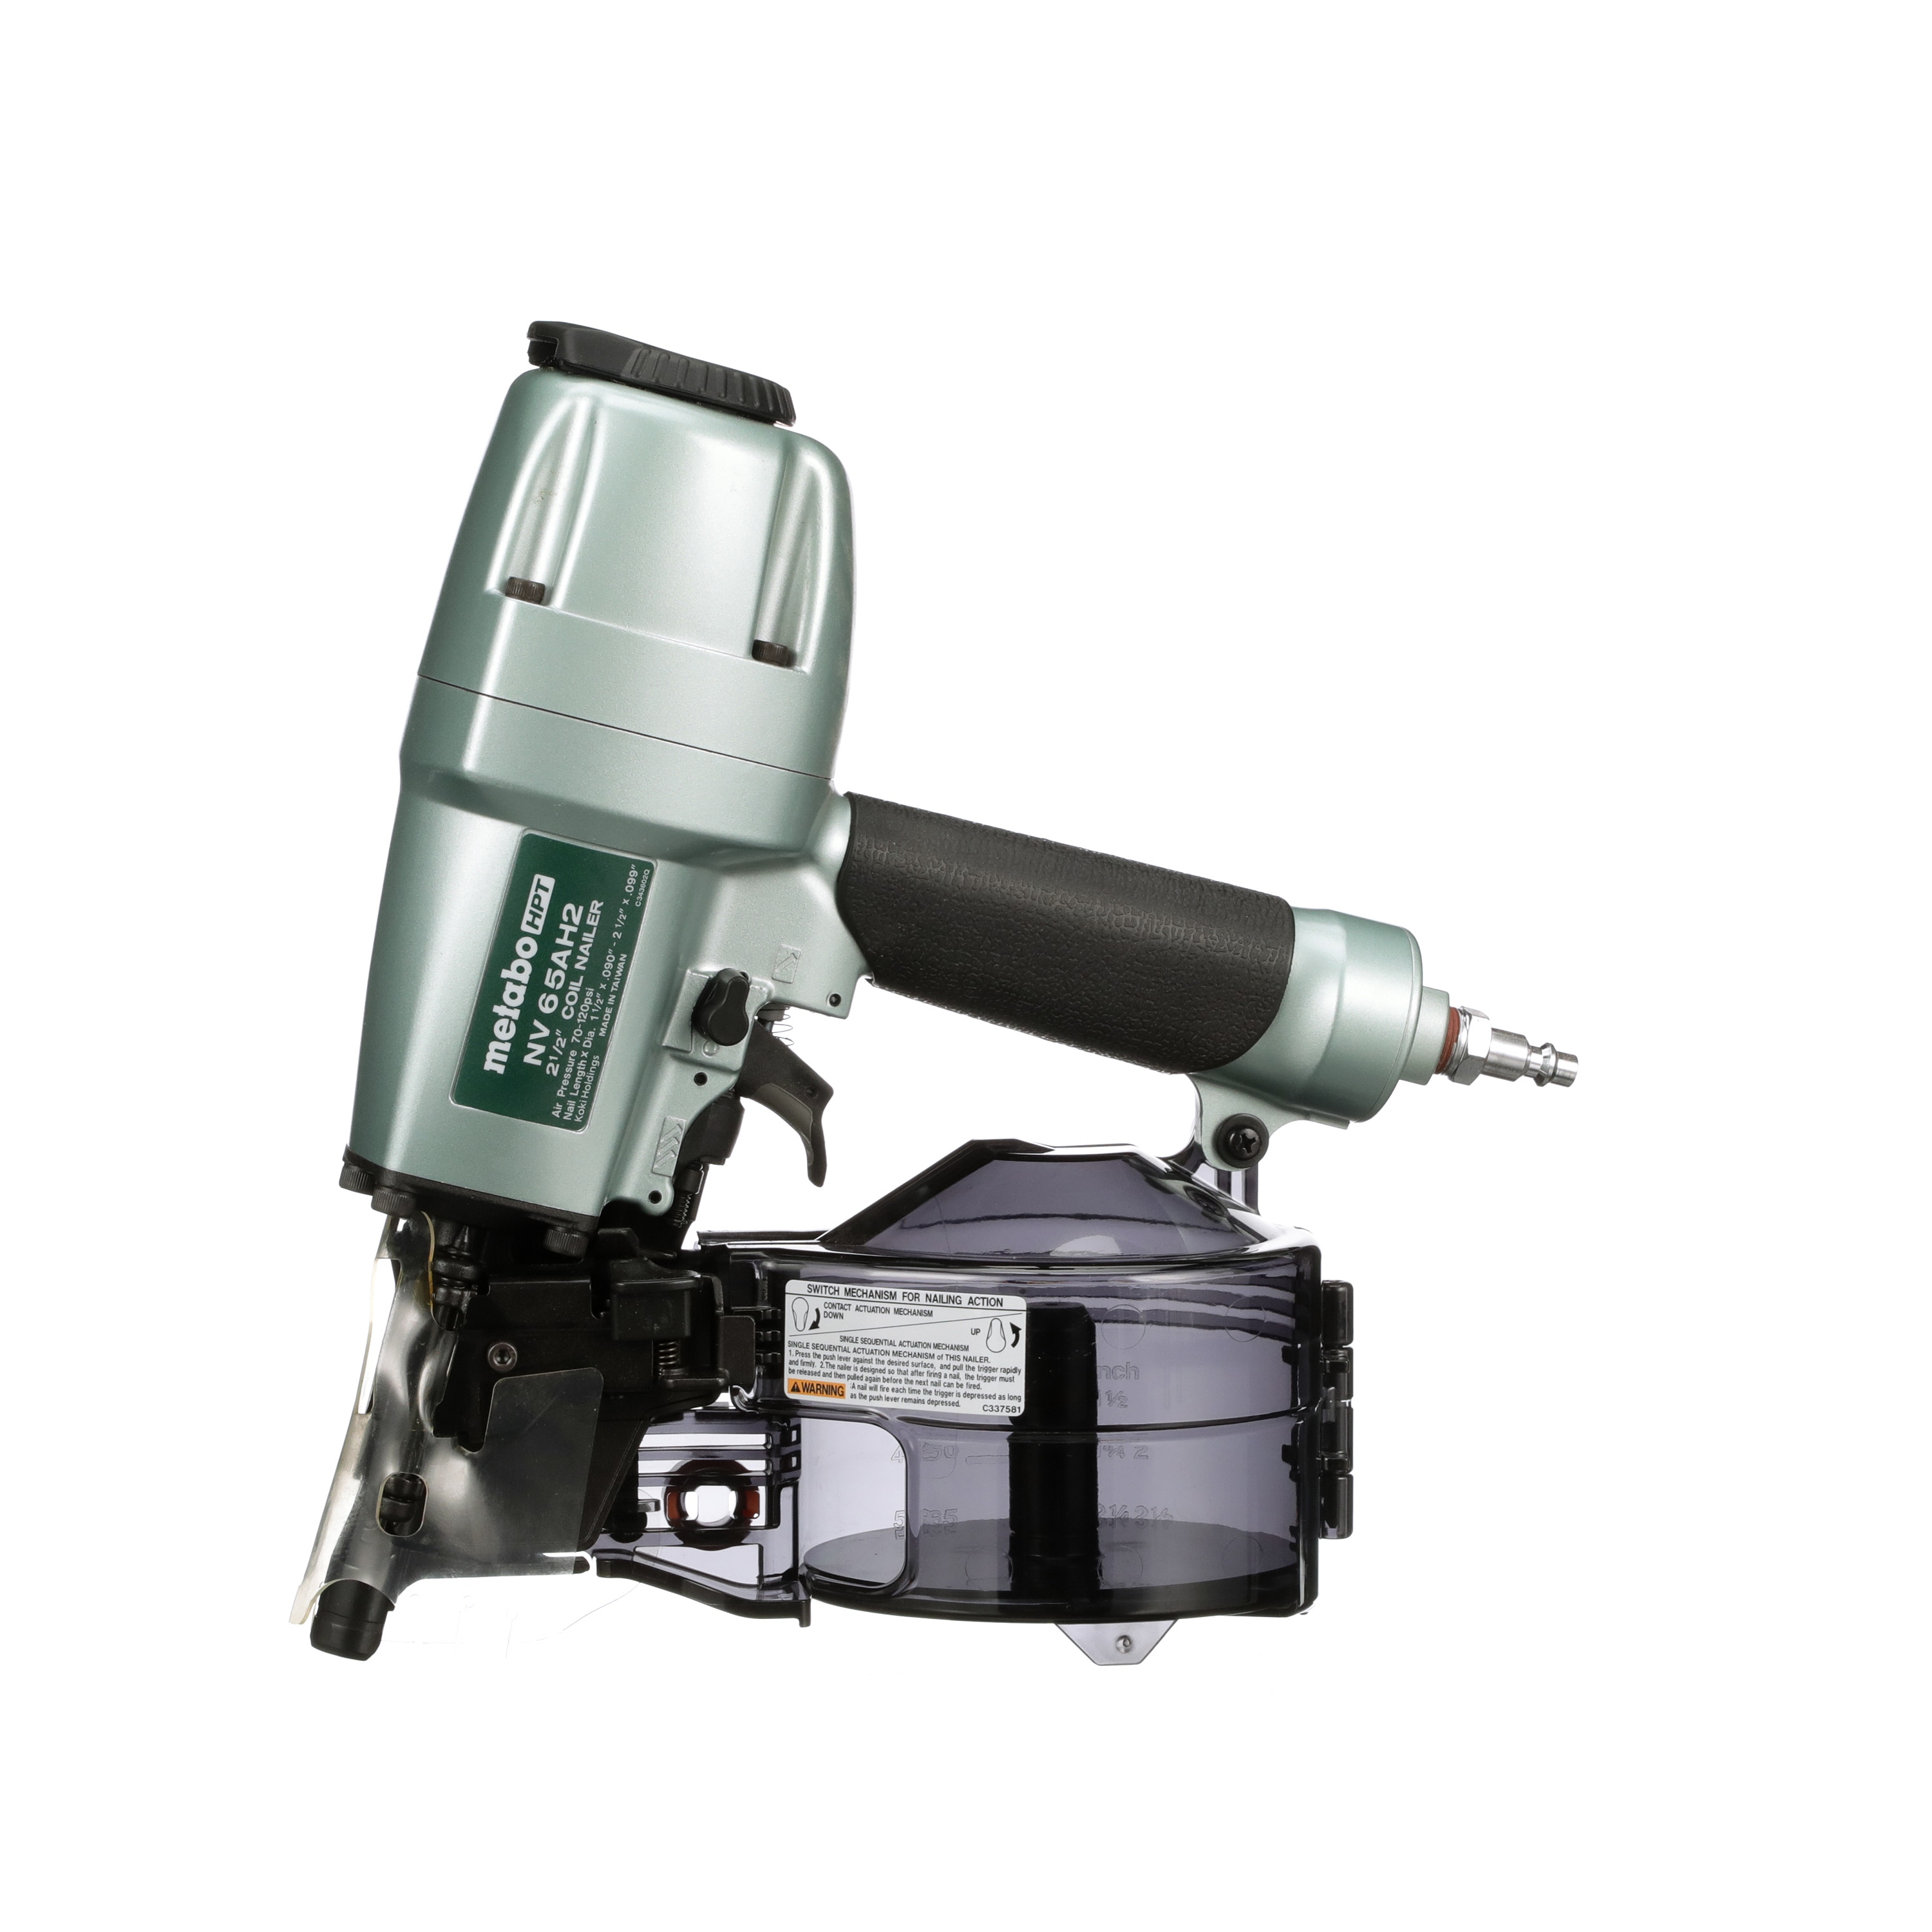 Metabo Joist Hanger Nail Gun: Your Ultimate Tool for Precision and Efficiency